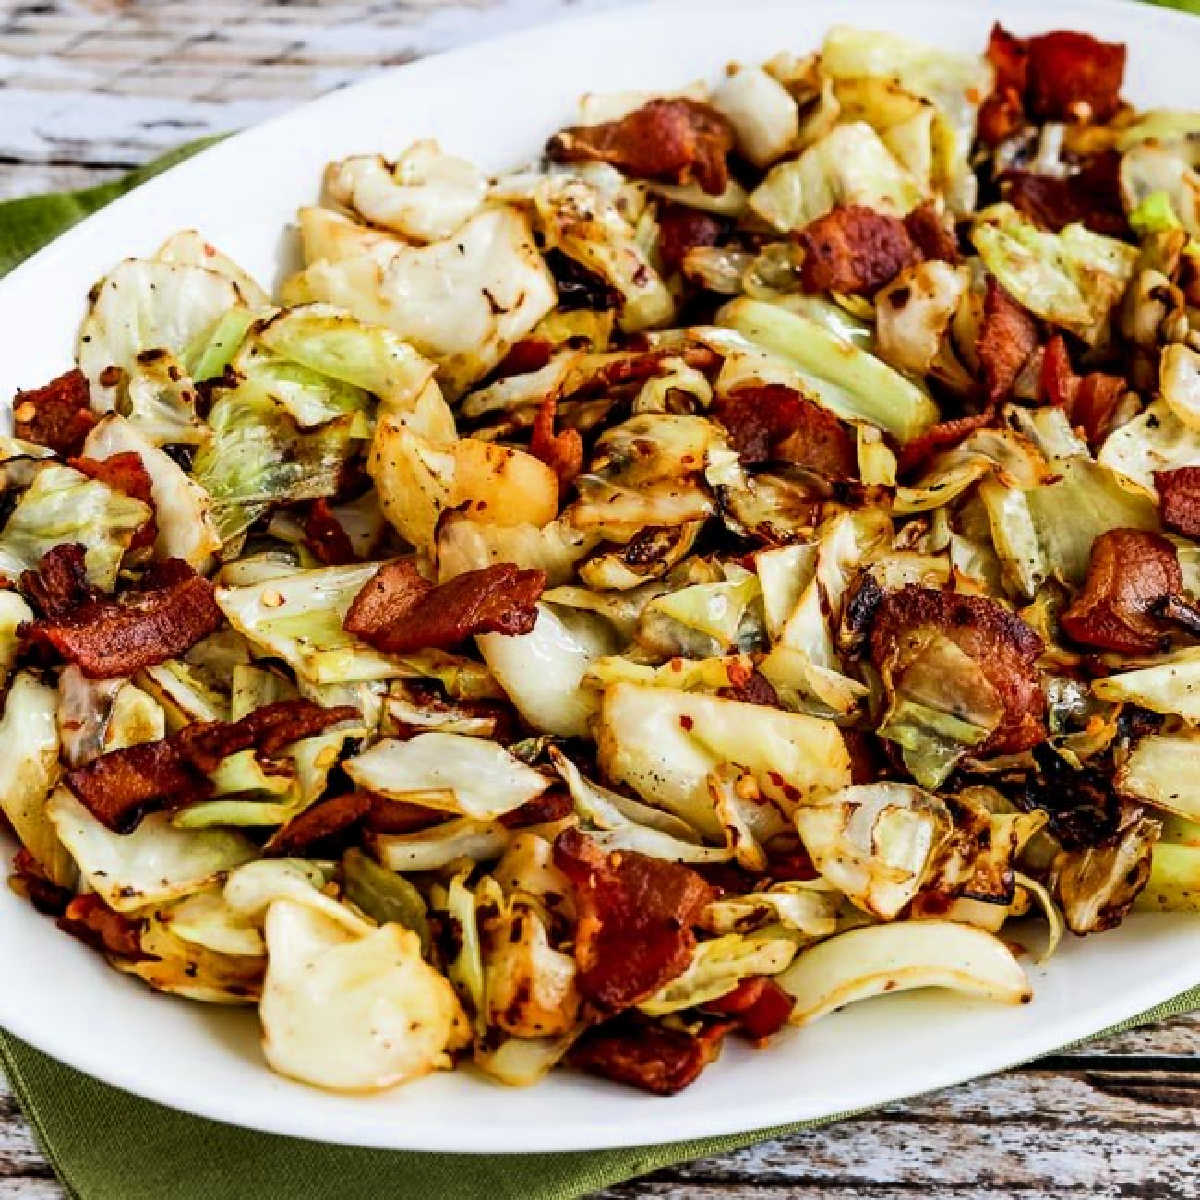 Square image of Fried Cabbage with Bacon shown on serving plate.